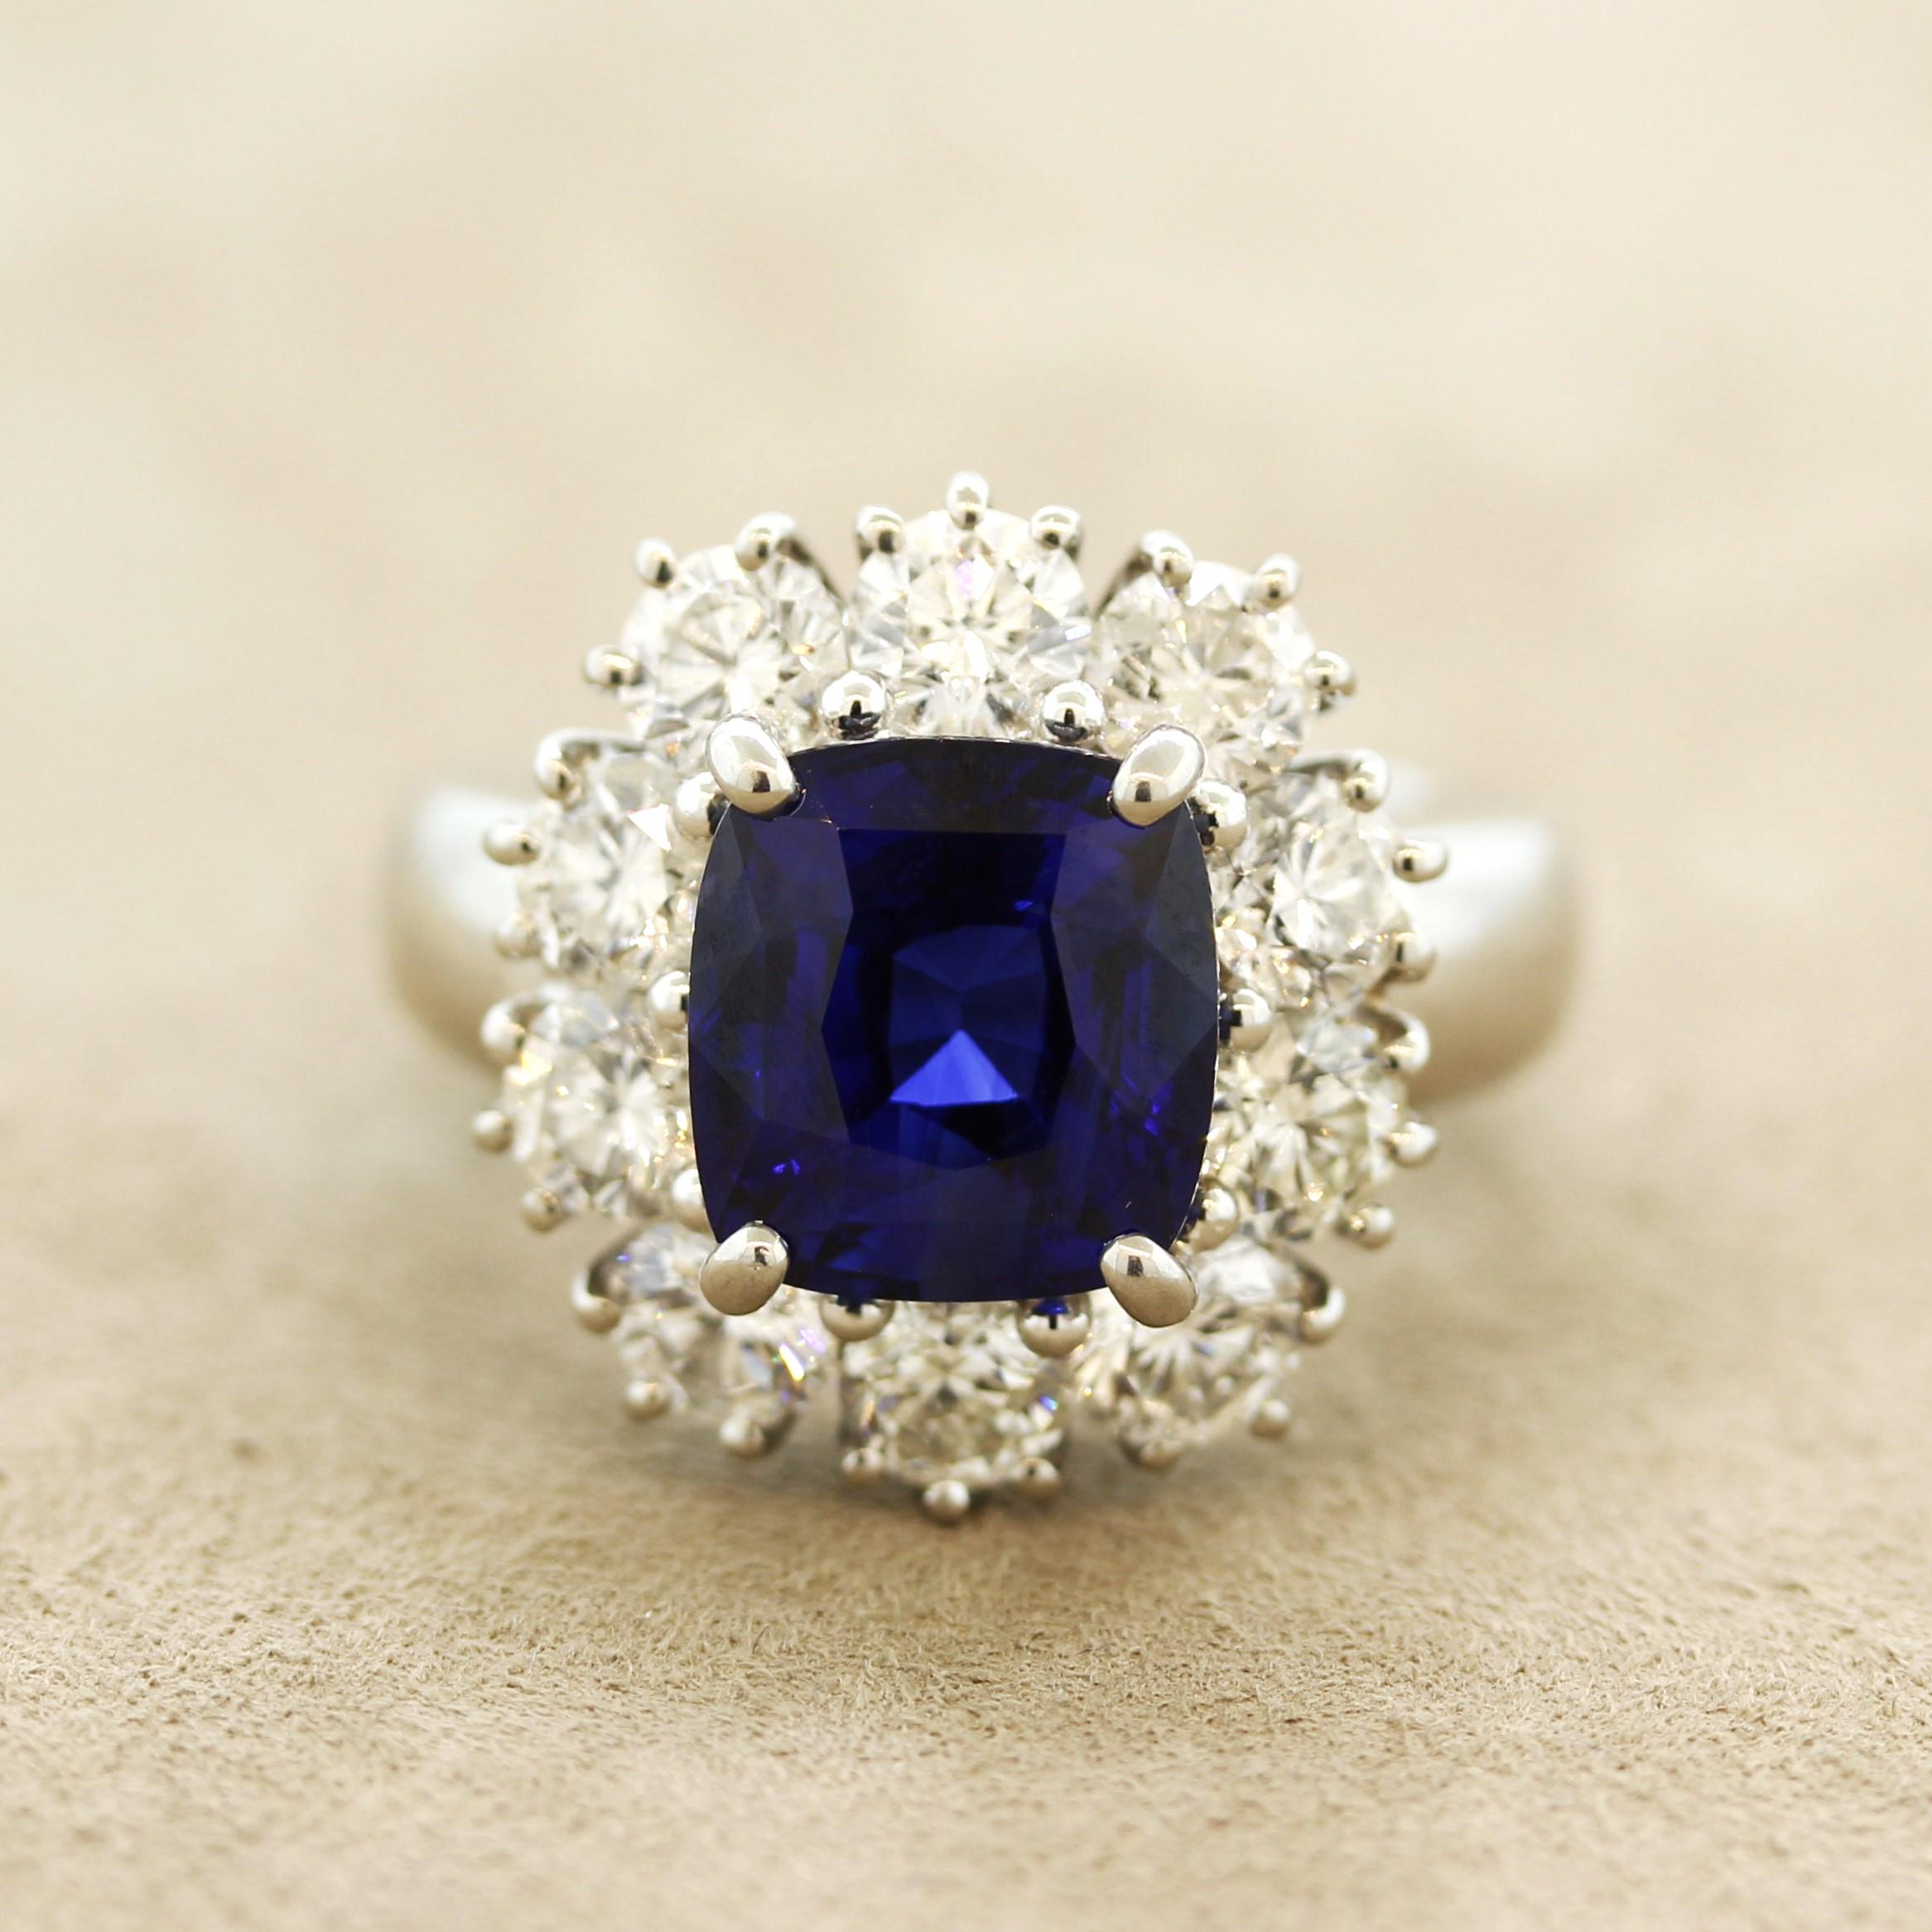 A rich royal blue sapphire with amazing color and clarity takes center stage of this platinum made ring! It weighs an impressive 5.88 carats and is certified by the AGL as natural. It is complemented by 3.13 carats of large round brilliant-cut